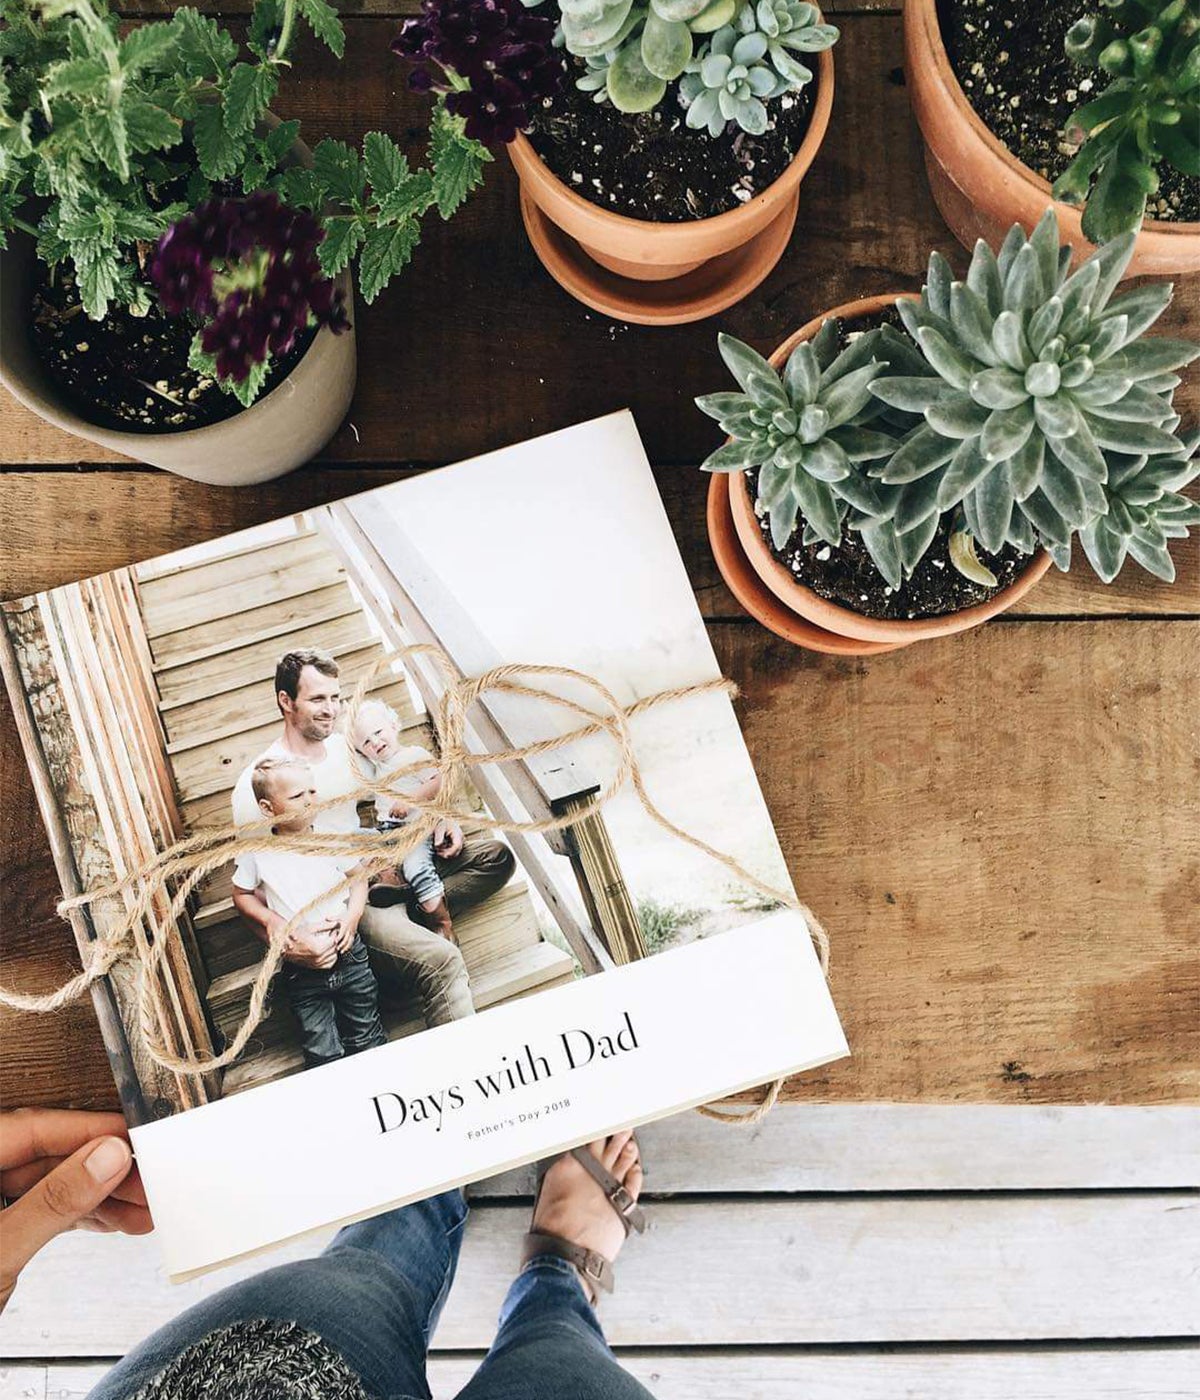 Hardcover Photo Book titled days with dad on table next to succulents